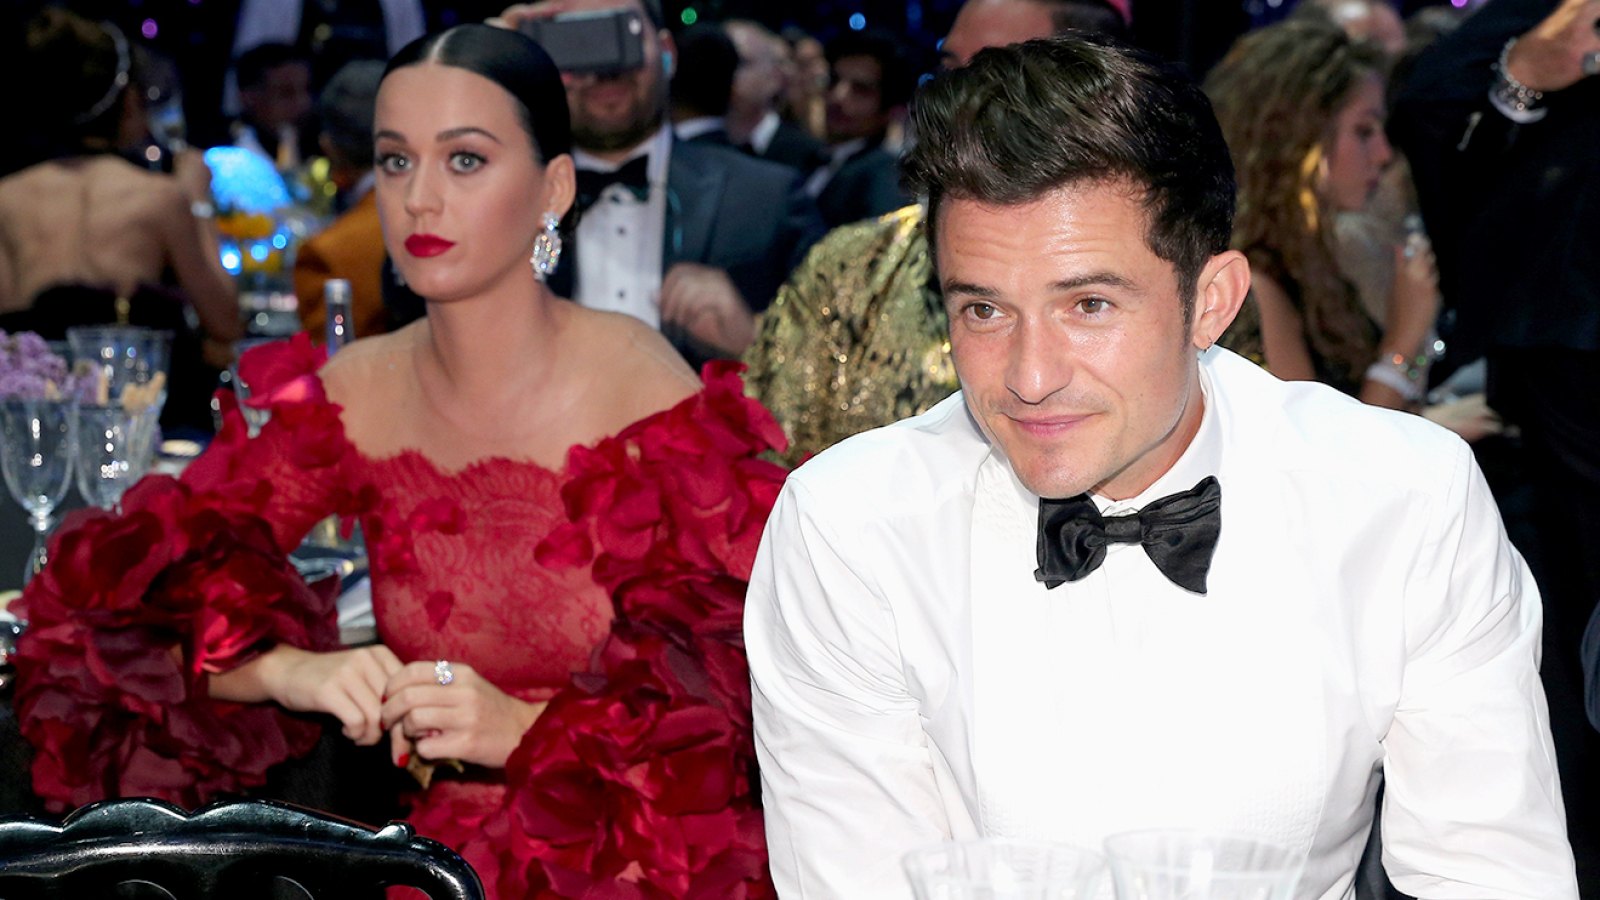 Katy Perry and Orlando Bloom attend the amfAR's 23rd Cinema Against AIDS Gala at the Hotel du Cap-Eden-Roc on May 19, 2016 in Cap d'Antibes, France.